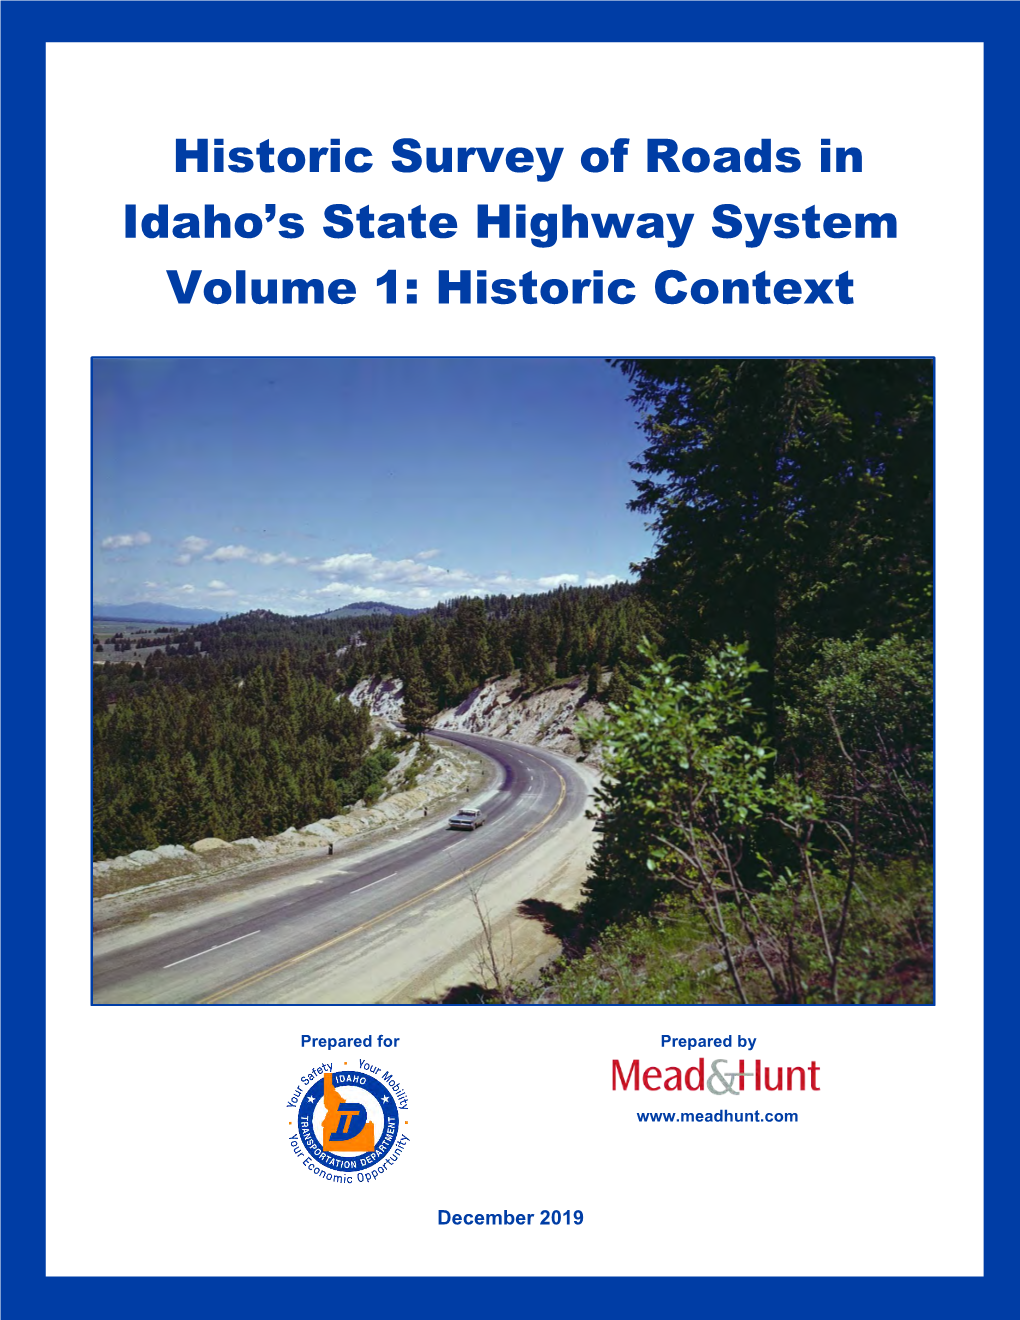 Historic Survey of Roads in Idaho's State Highway System